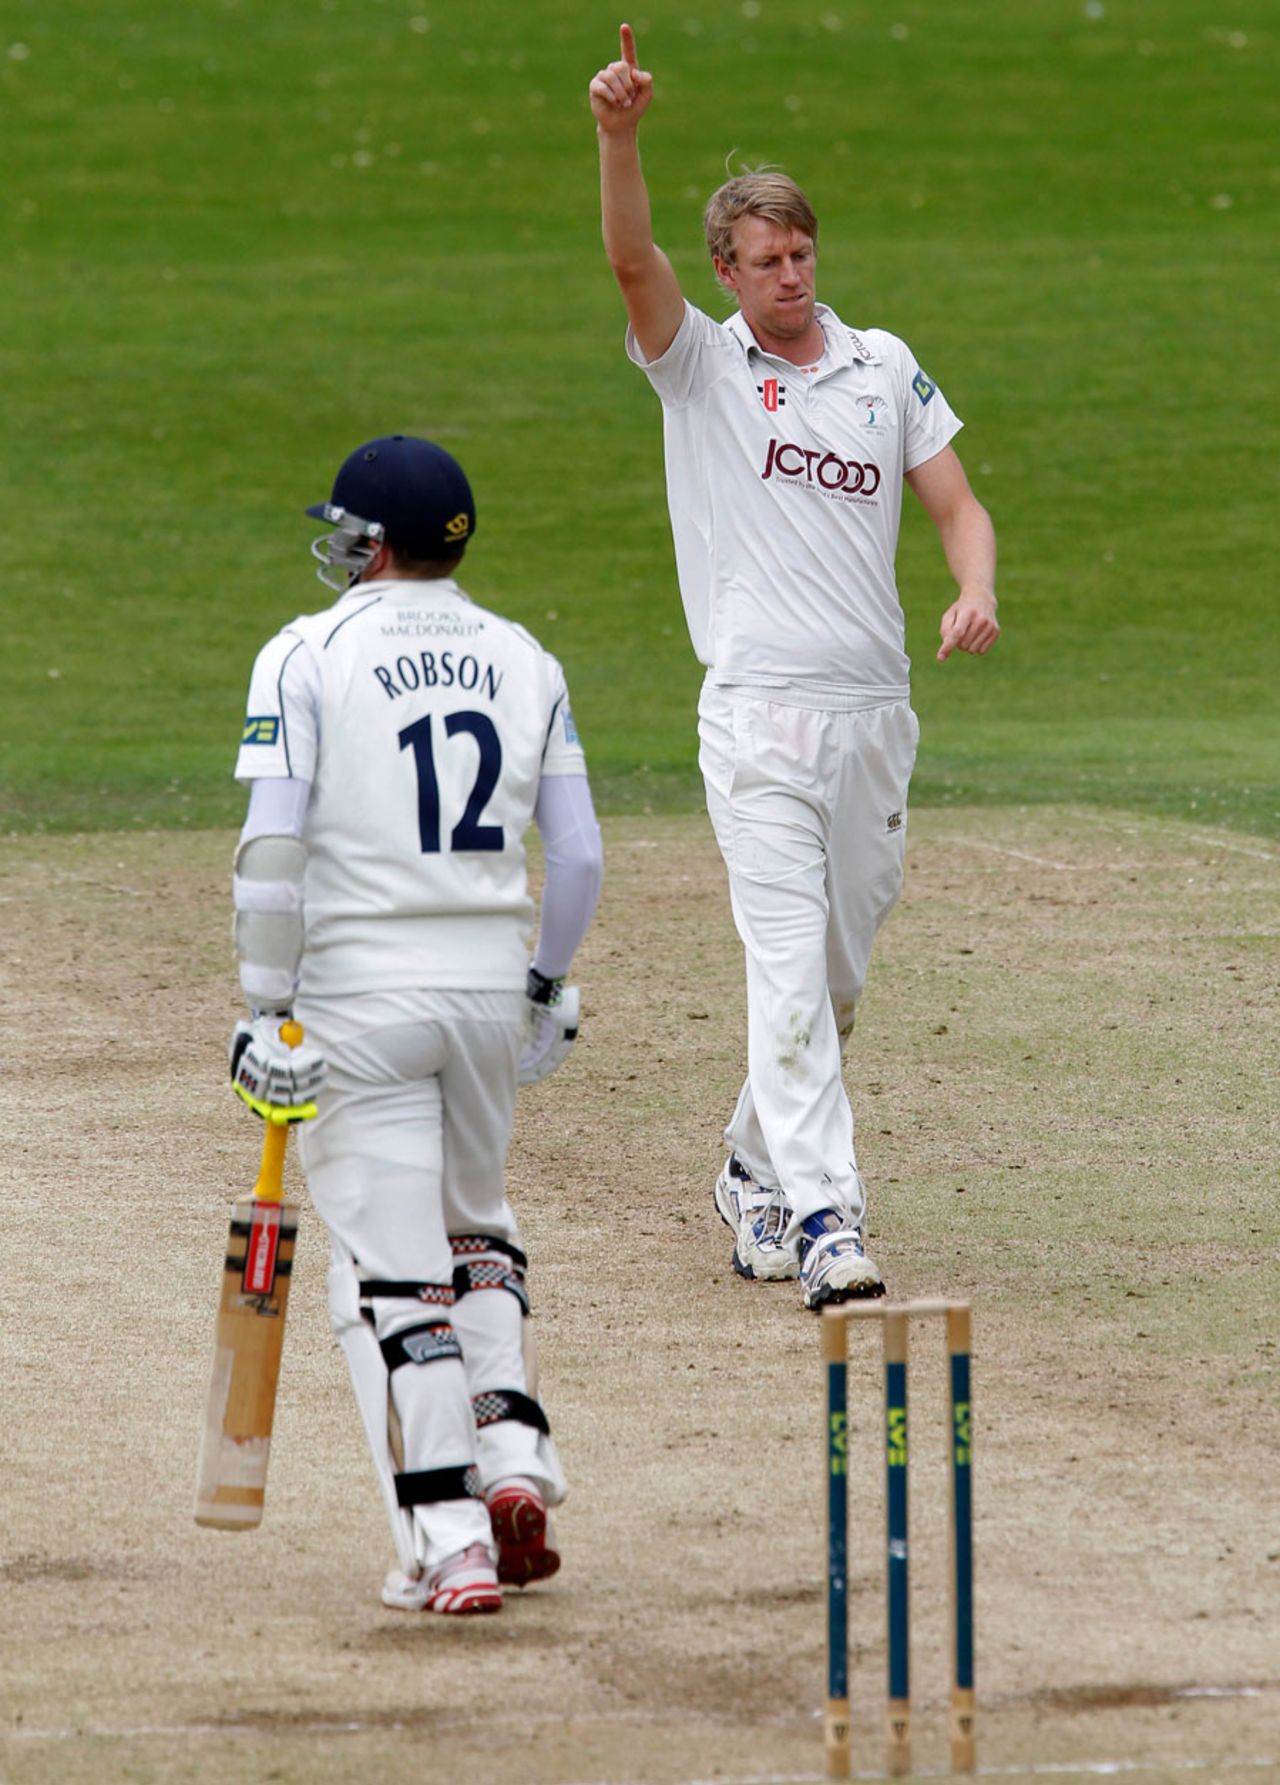 Steven Patterson removed Sam Robson for 3, Yorkshire v Middlesex, County Championship, Division One, Headingley, 4th day, September 20, 2013